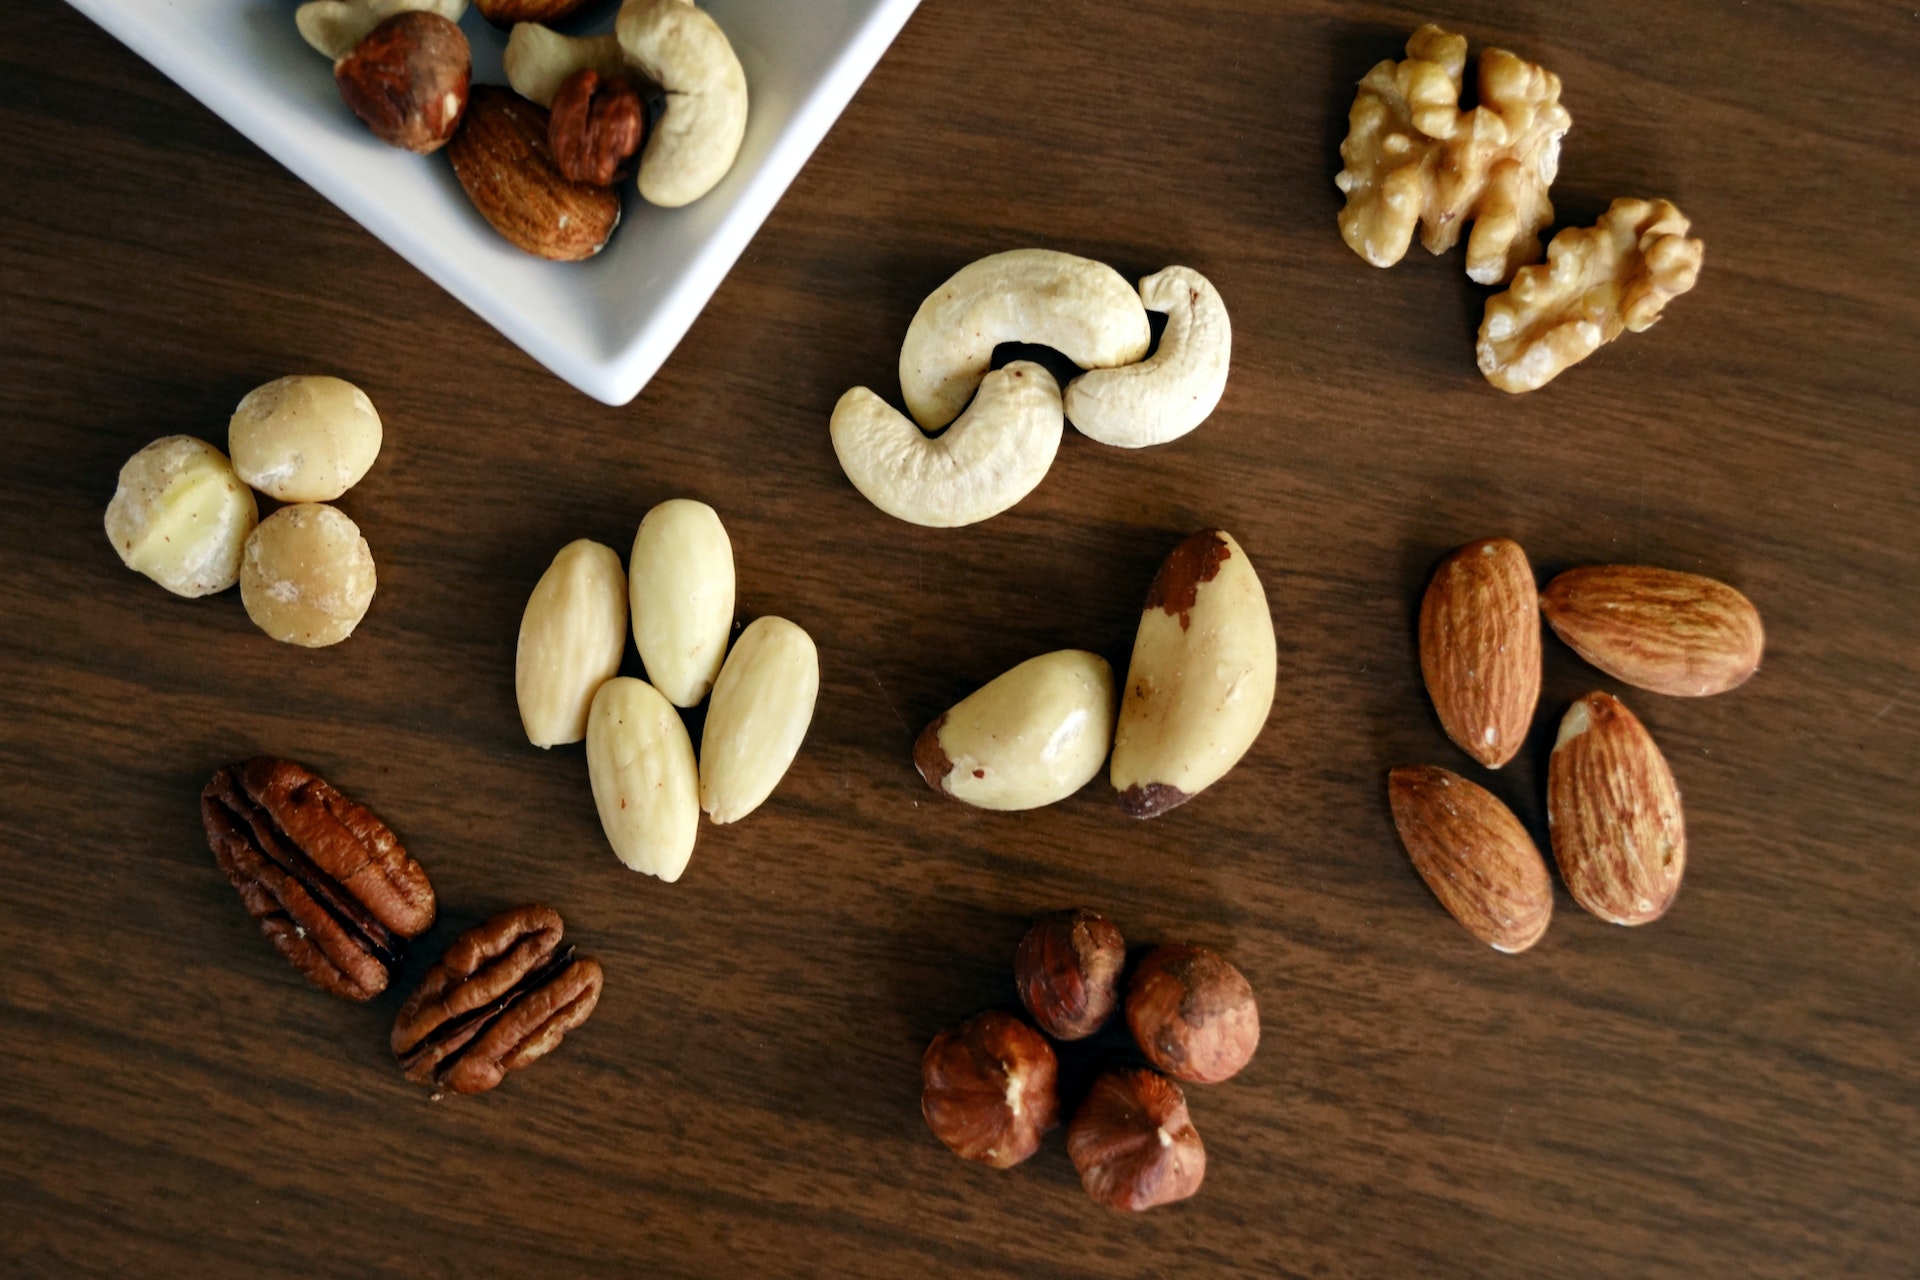 Lentils, almonds, and other nuts